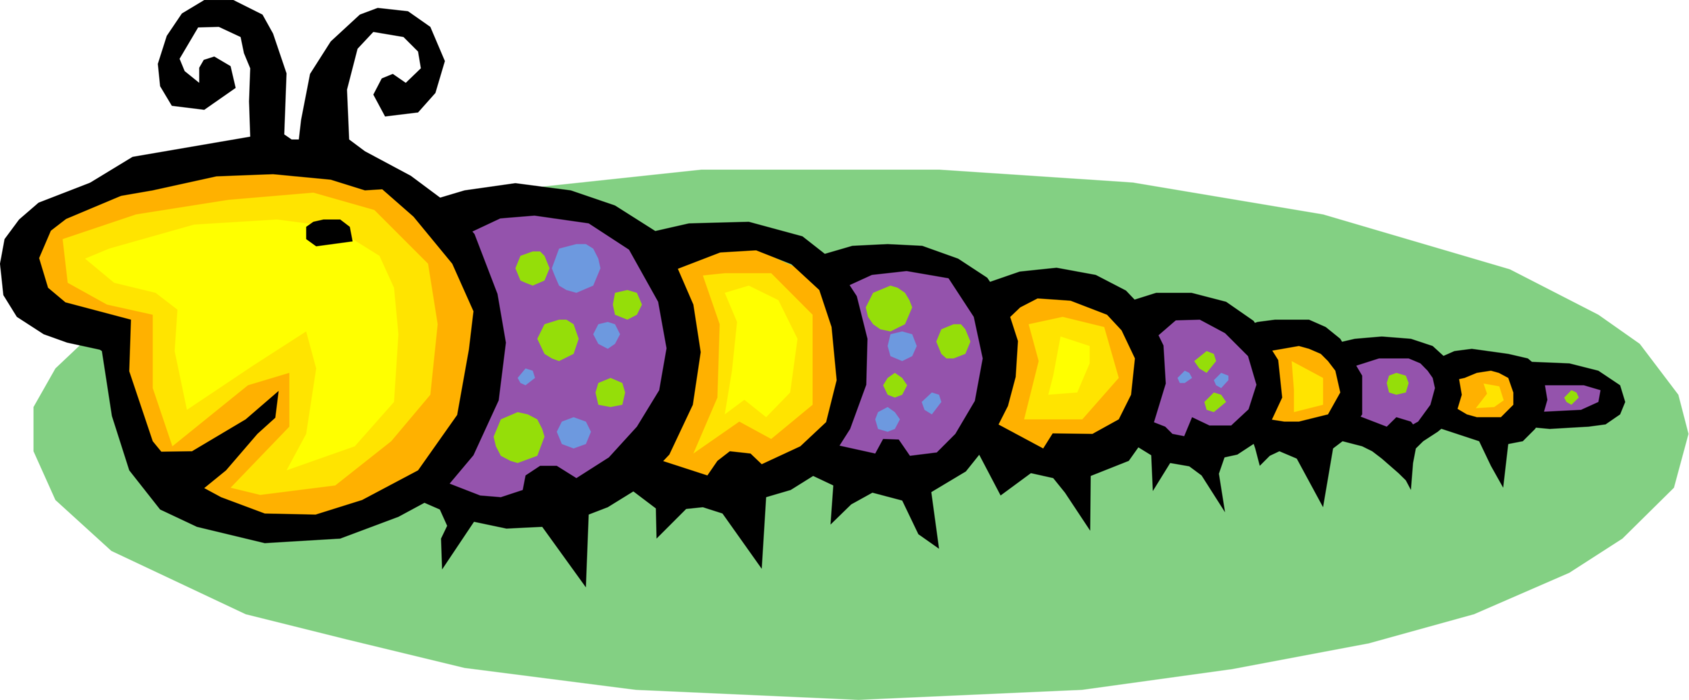 Vector Illustration of Small Yellow and Purple Caterpillar